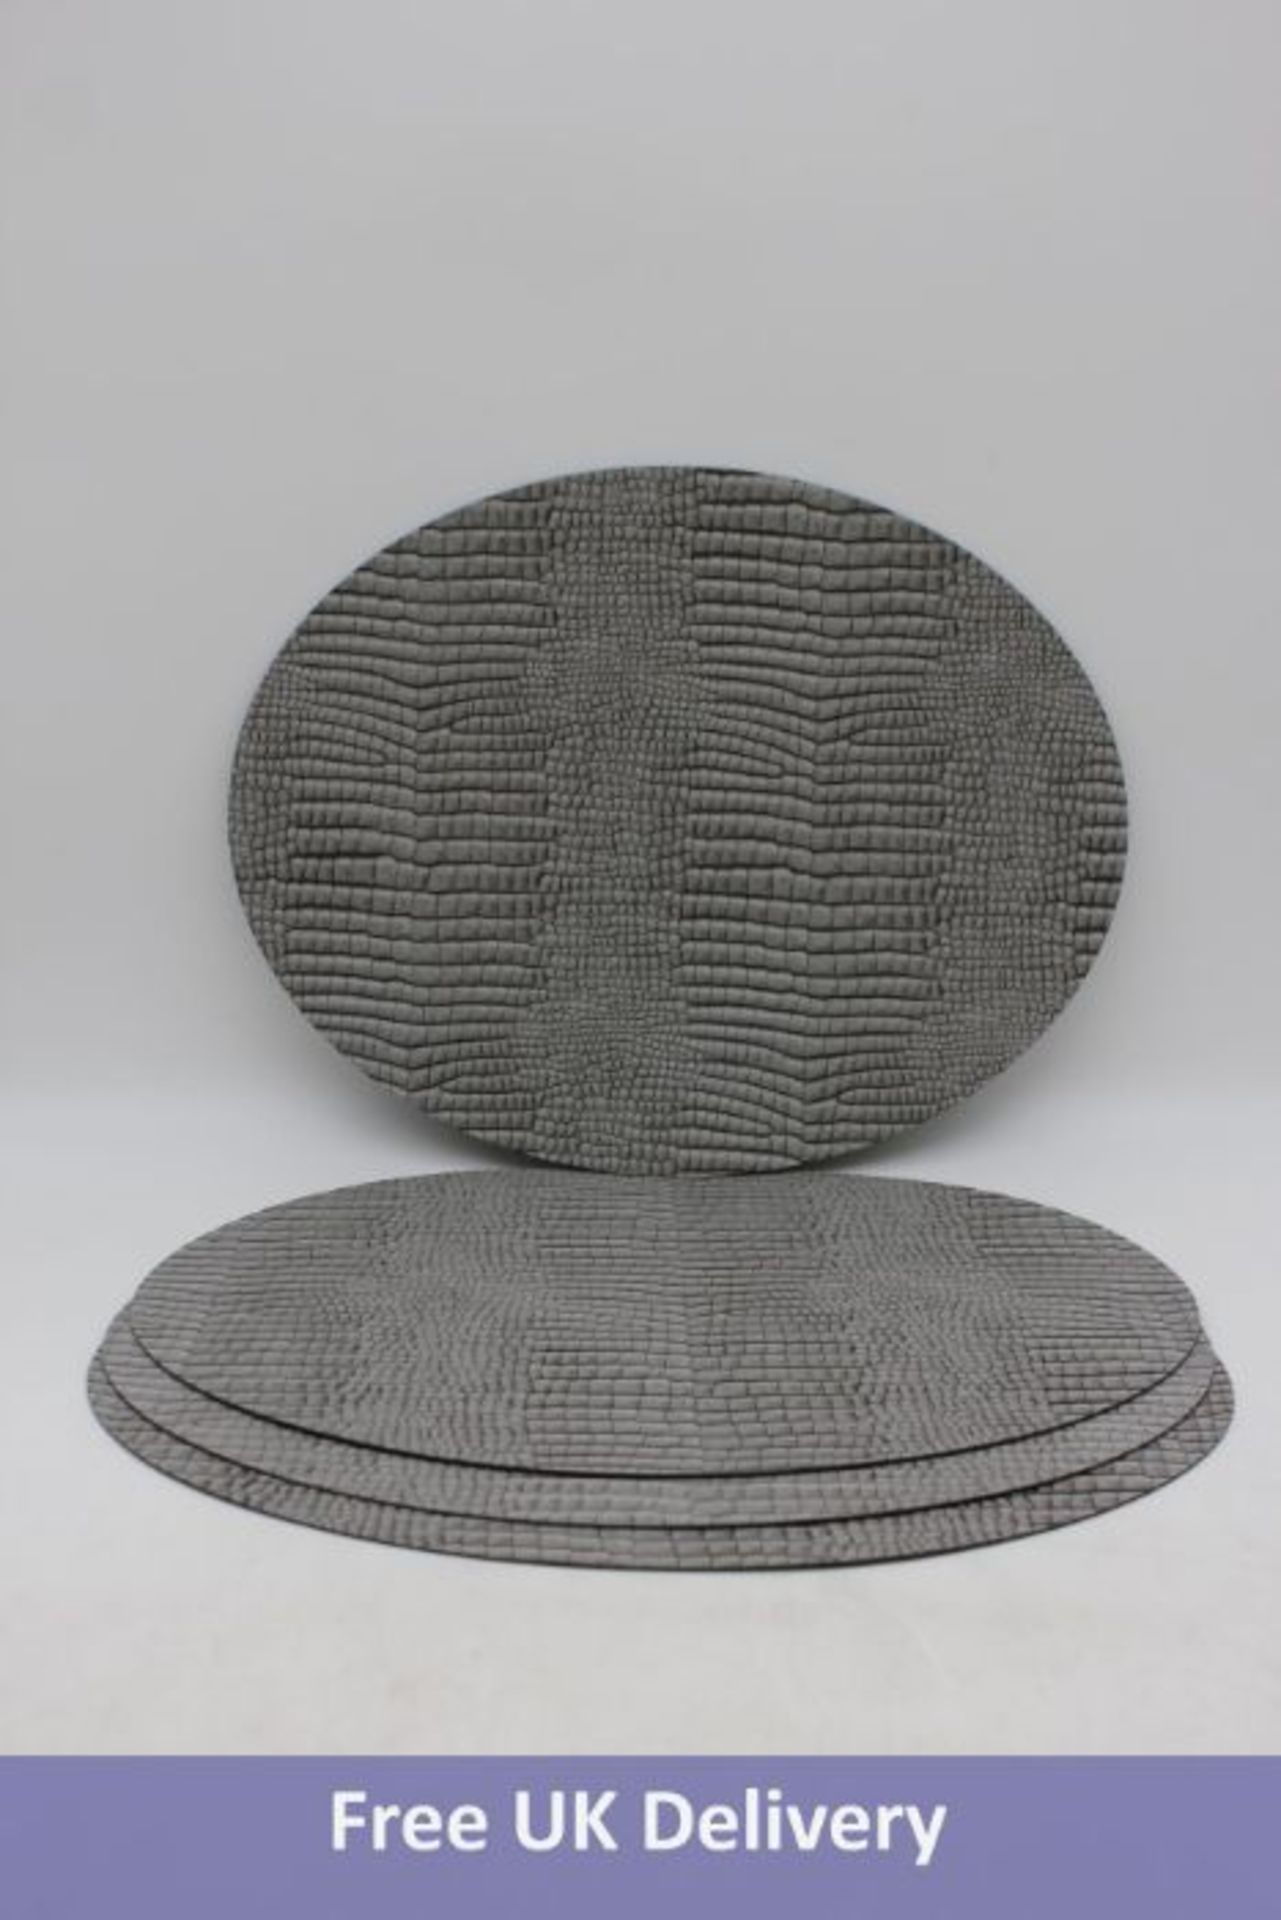 Twenty Lind DNA Oval Table Mats, CROCO Silver-Black Leather, 35 x 46 cm - Image 5 of 5